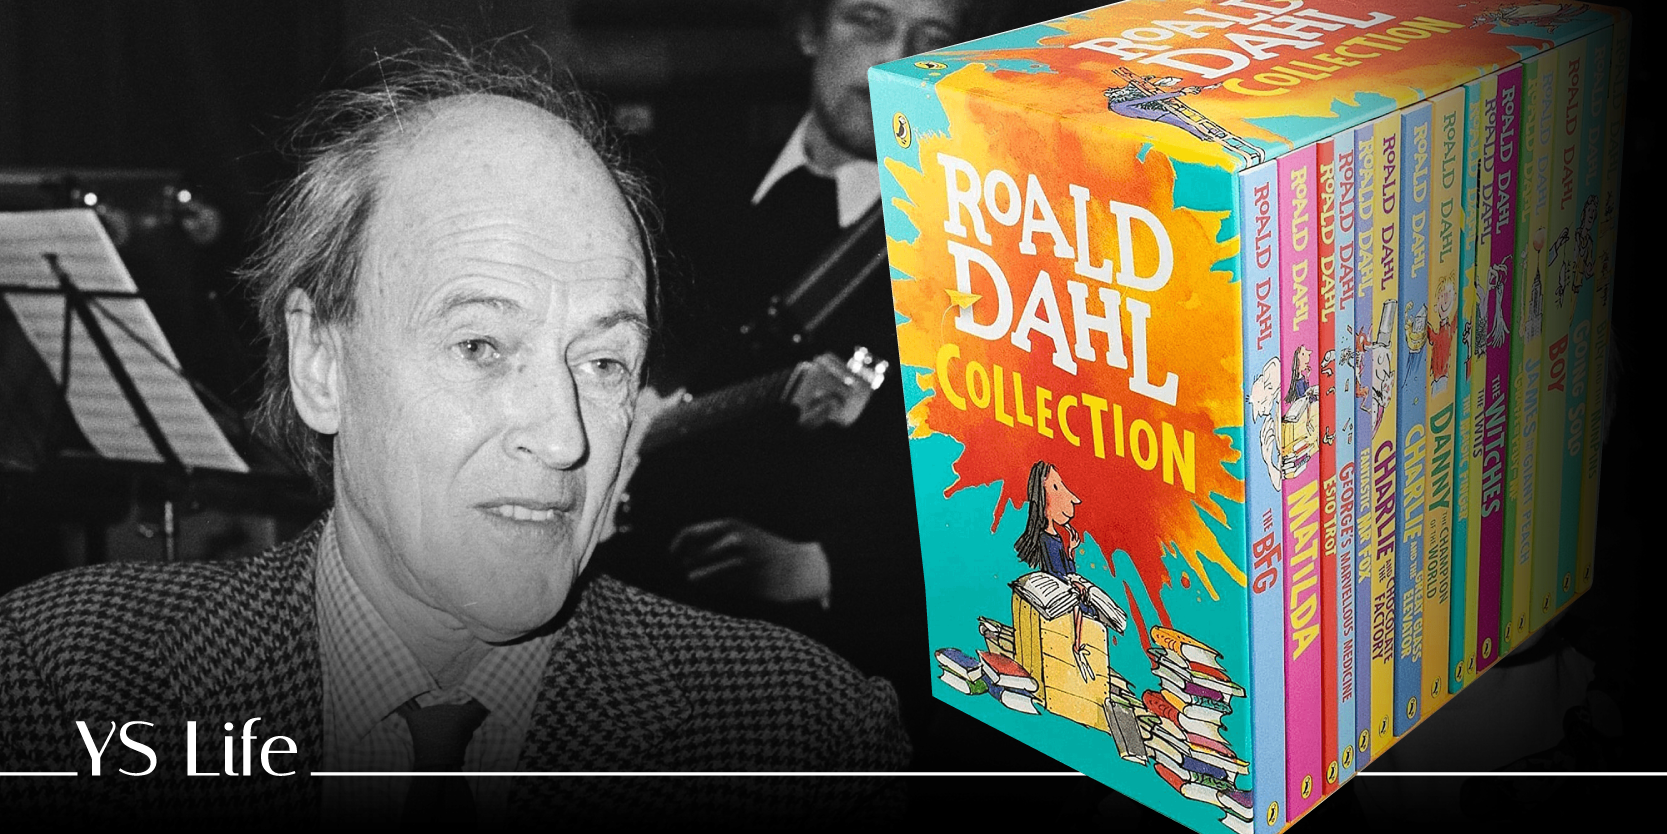 Politically correct but at what cost? Roald Dahl’s books are being rewritten 